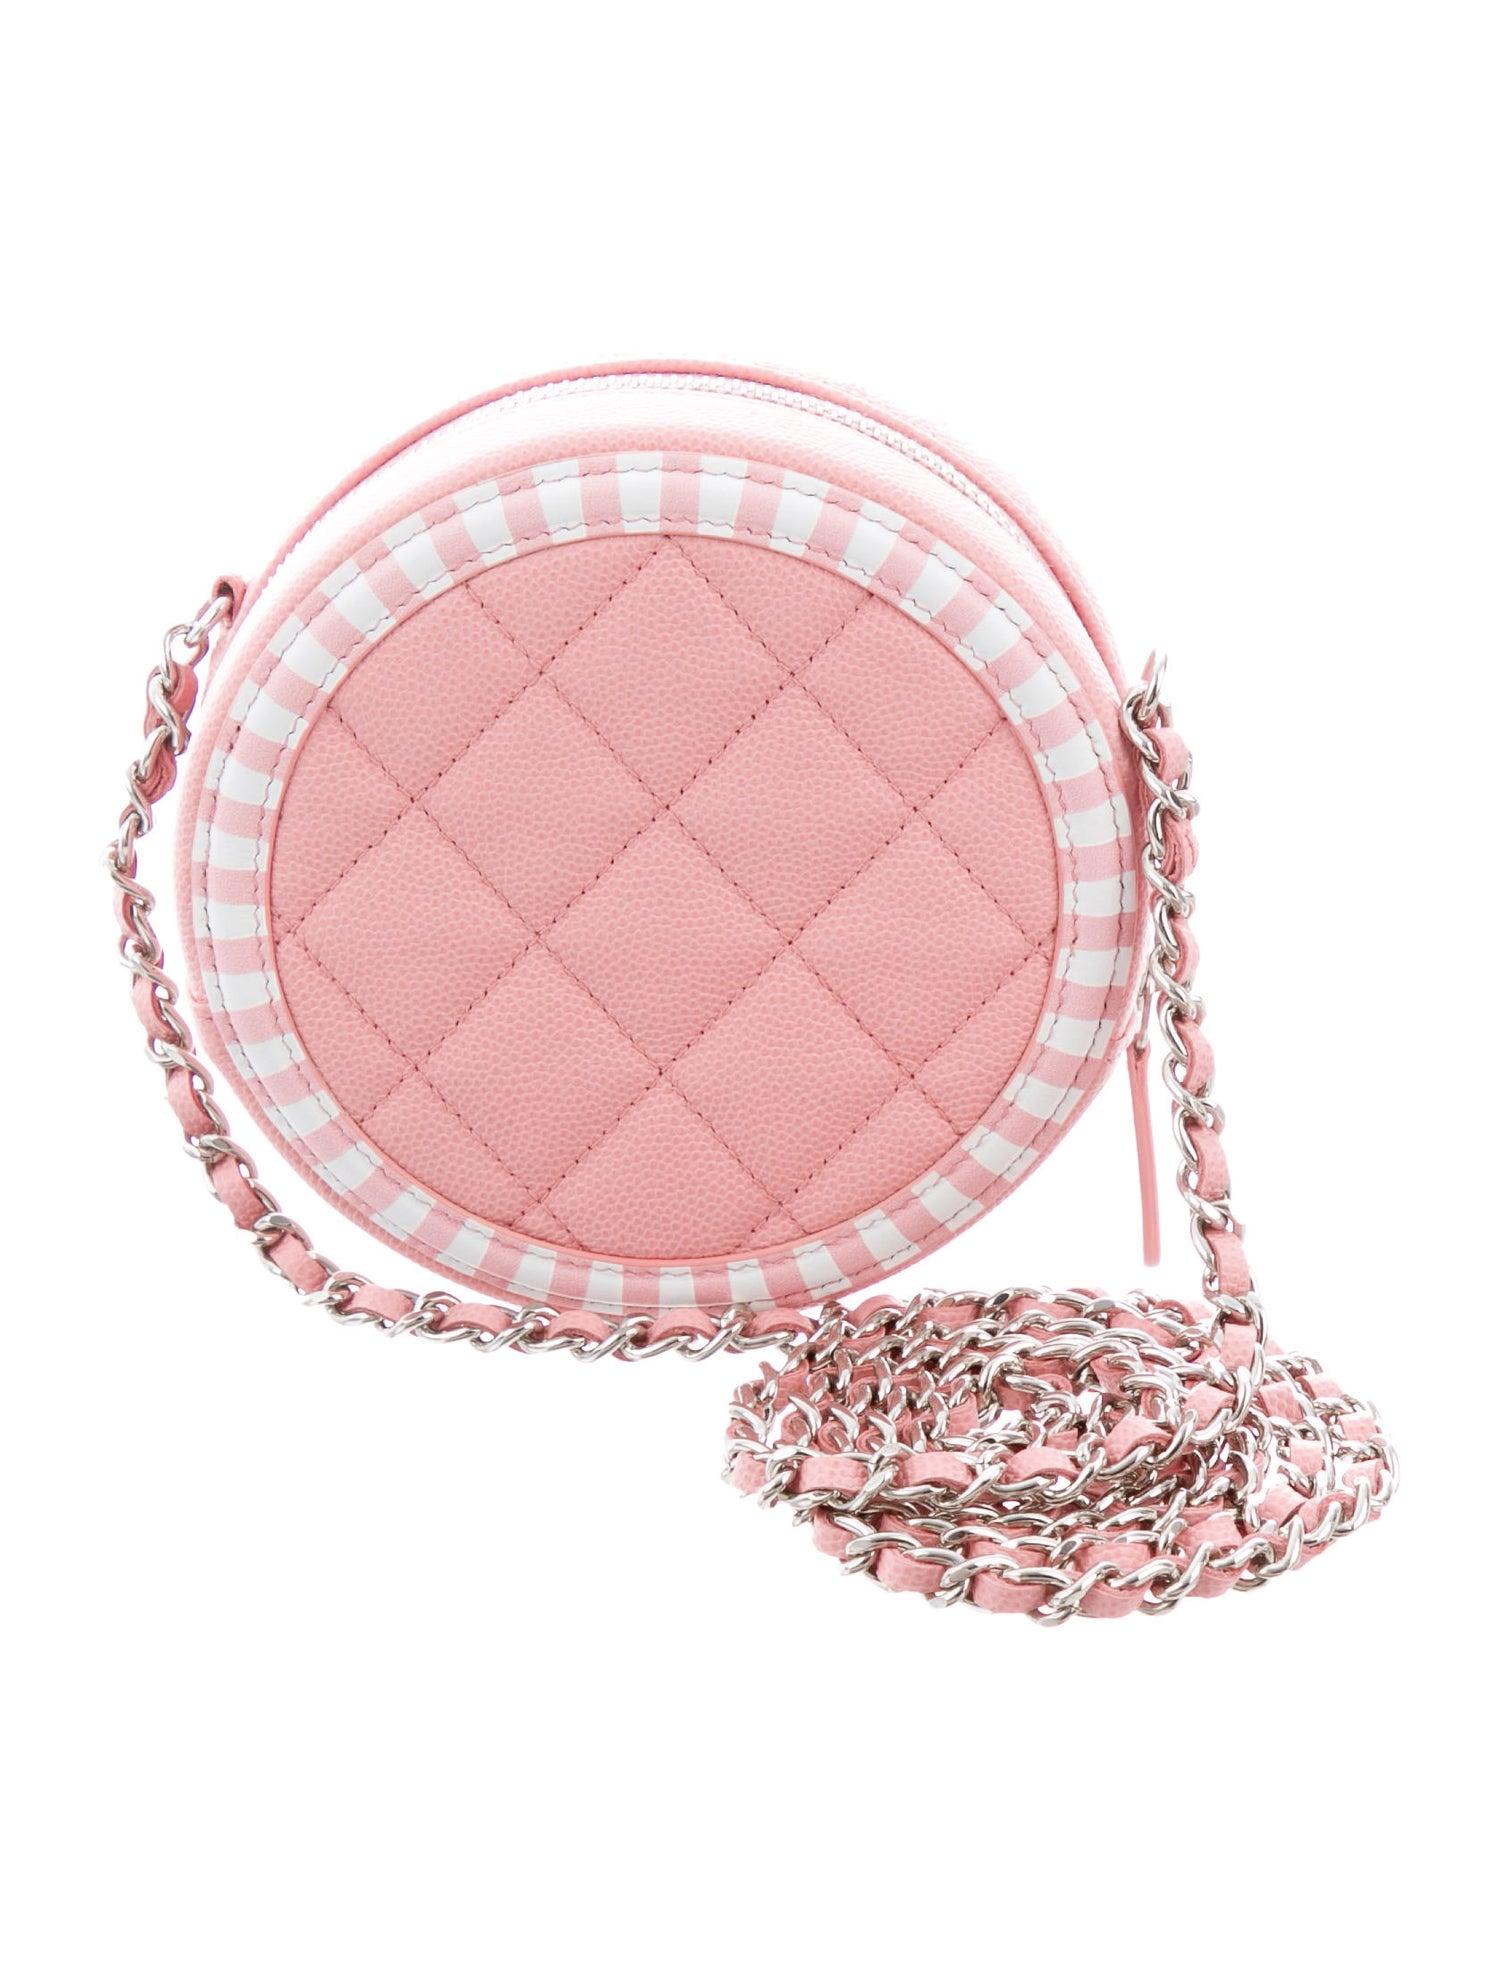 Chanel NEW Pink White Leather Circle Silver Small Evening Shoulder Bag in Box

Caviar leather
Silver tone hardware 
Woven interior 
Zipper closure
Date code present
Made in Italy
Shoulder strap drop 23.75